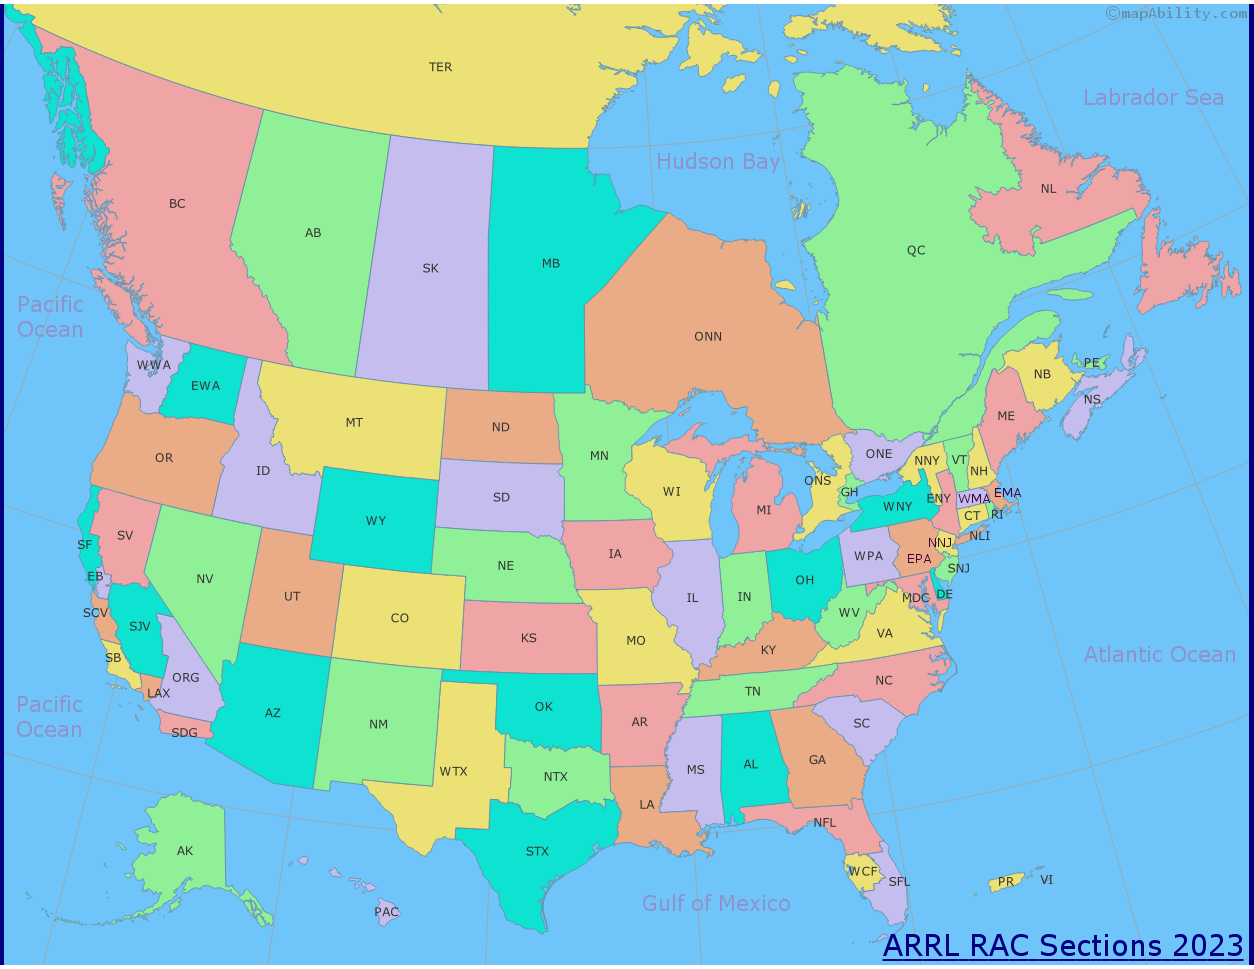 ARRL/RAC sections map from https://www.mapability.com/ei8ic/maps/sections_2.php